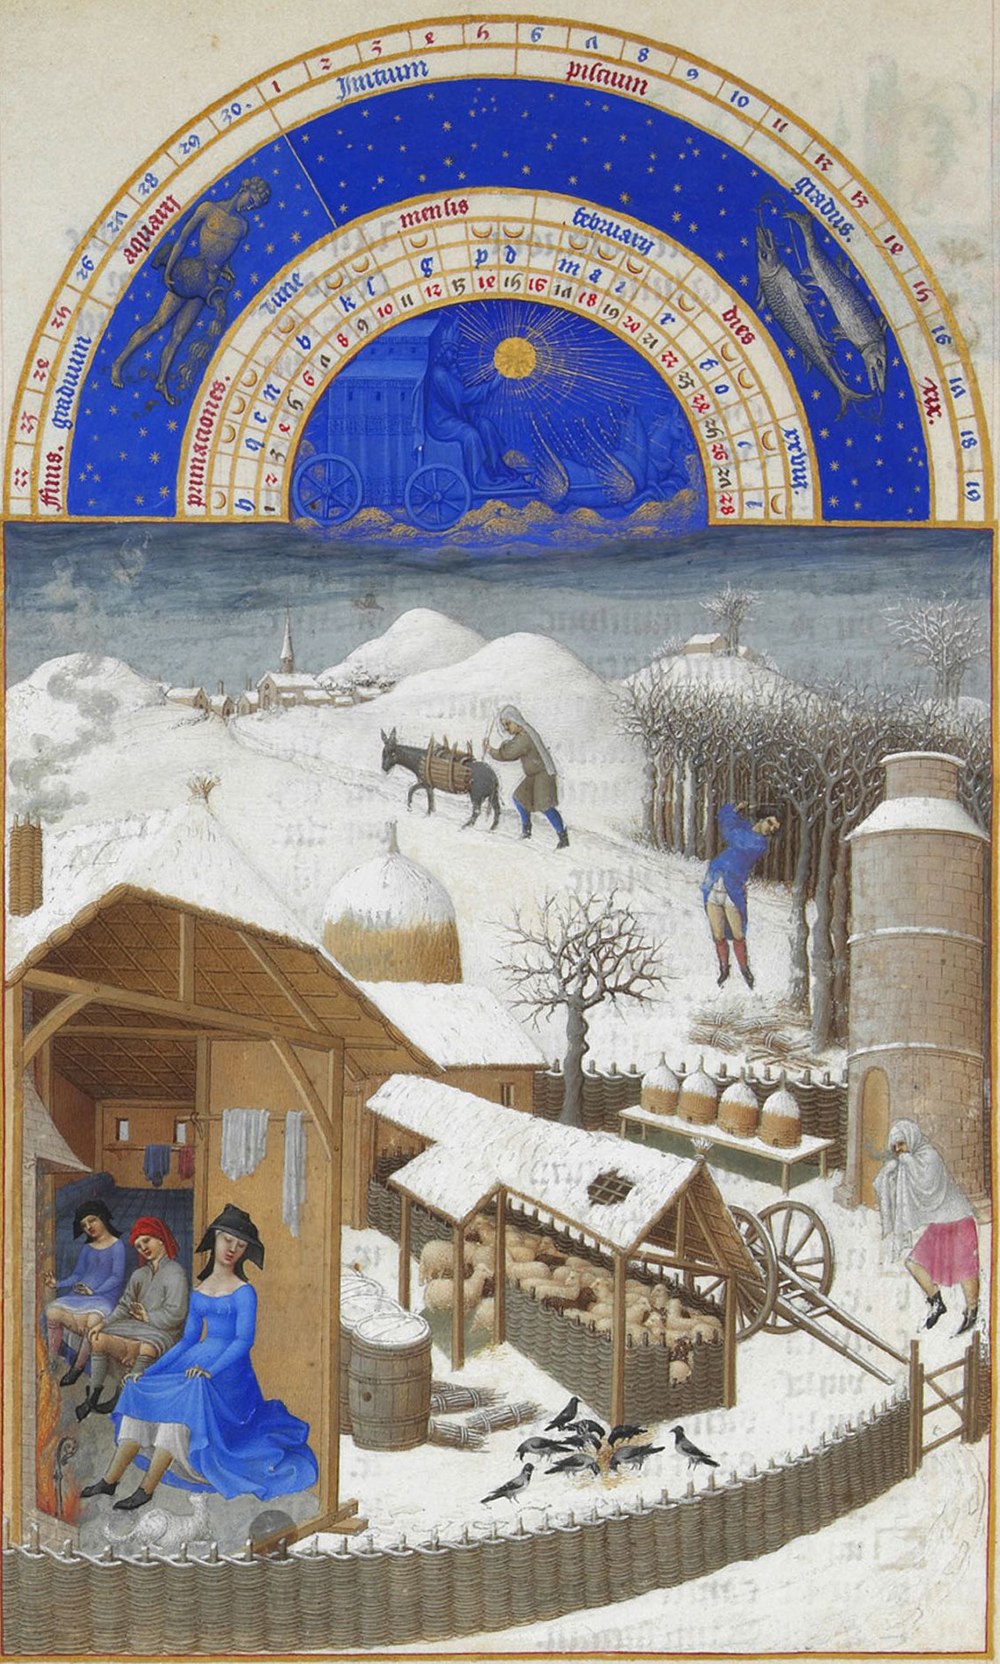 February illustration from Très Riches Heures du duc de Berry by the Limbourg brothers, c. 1414. Wikimedia Commons, Condé Museum.